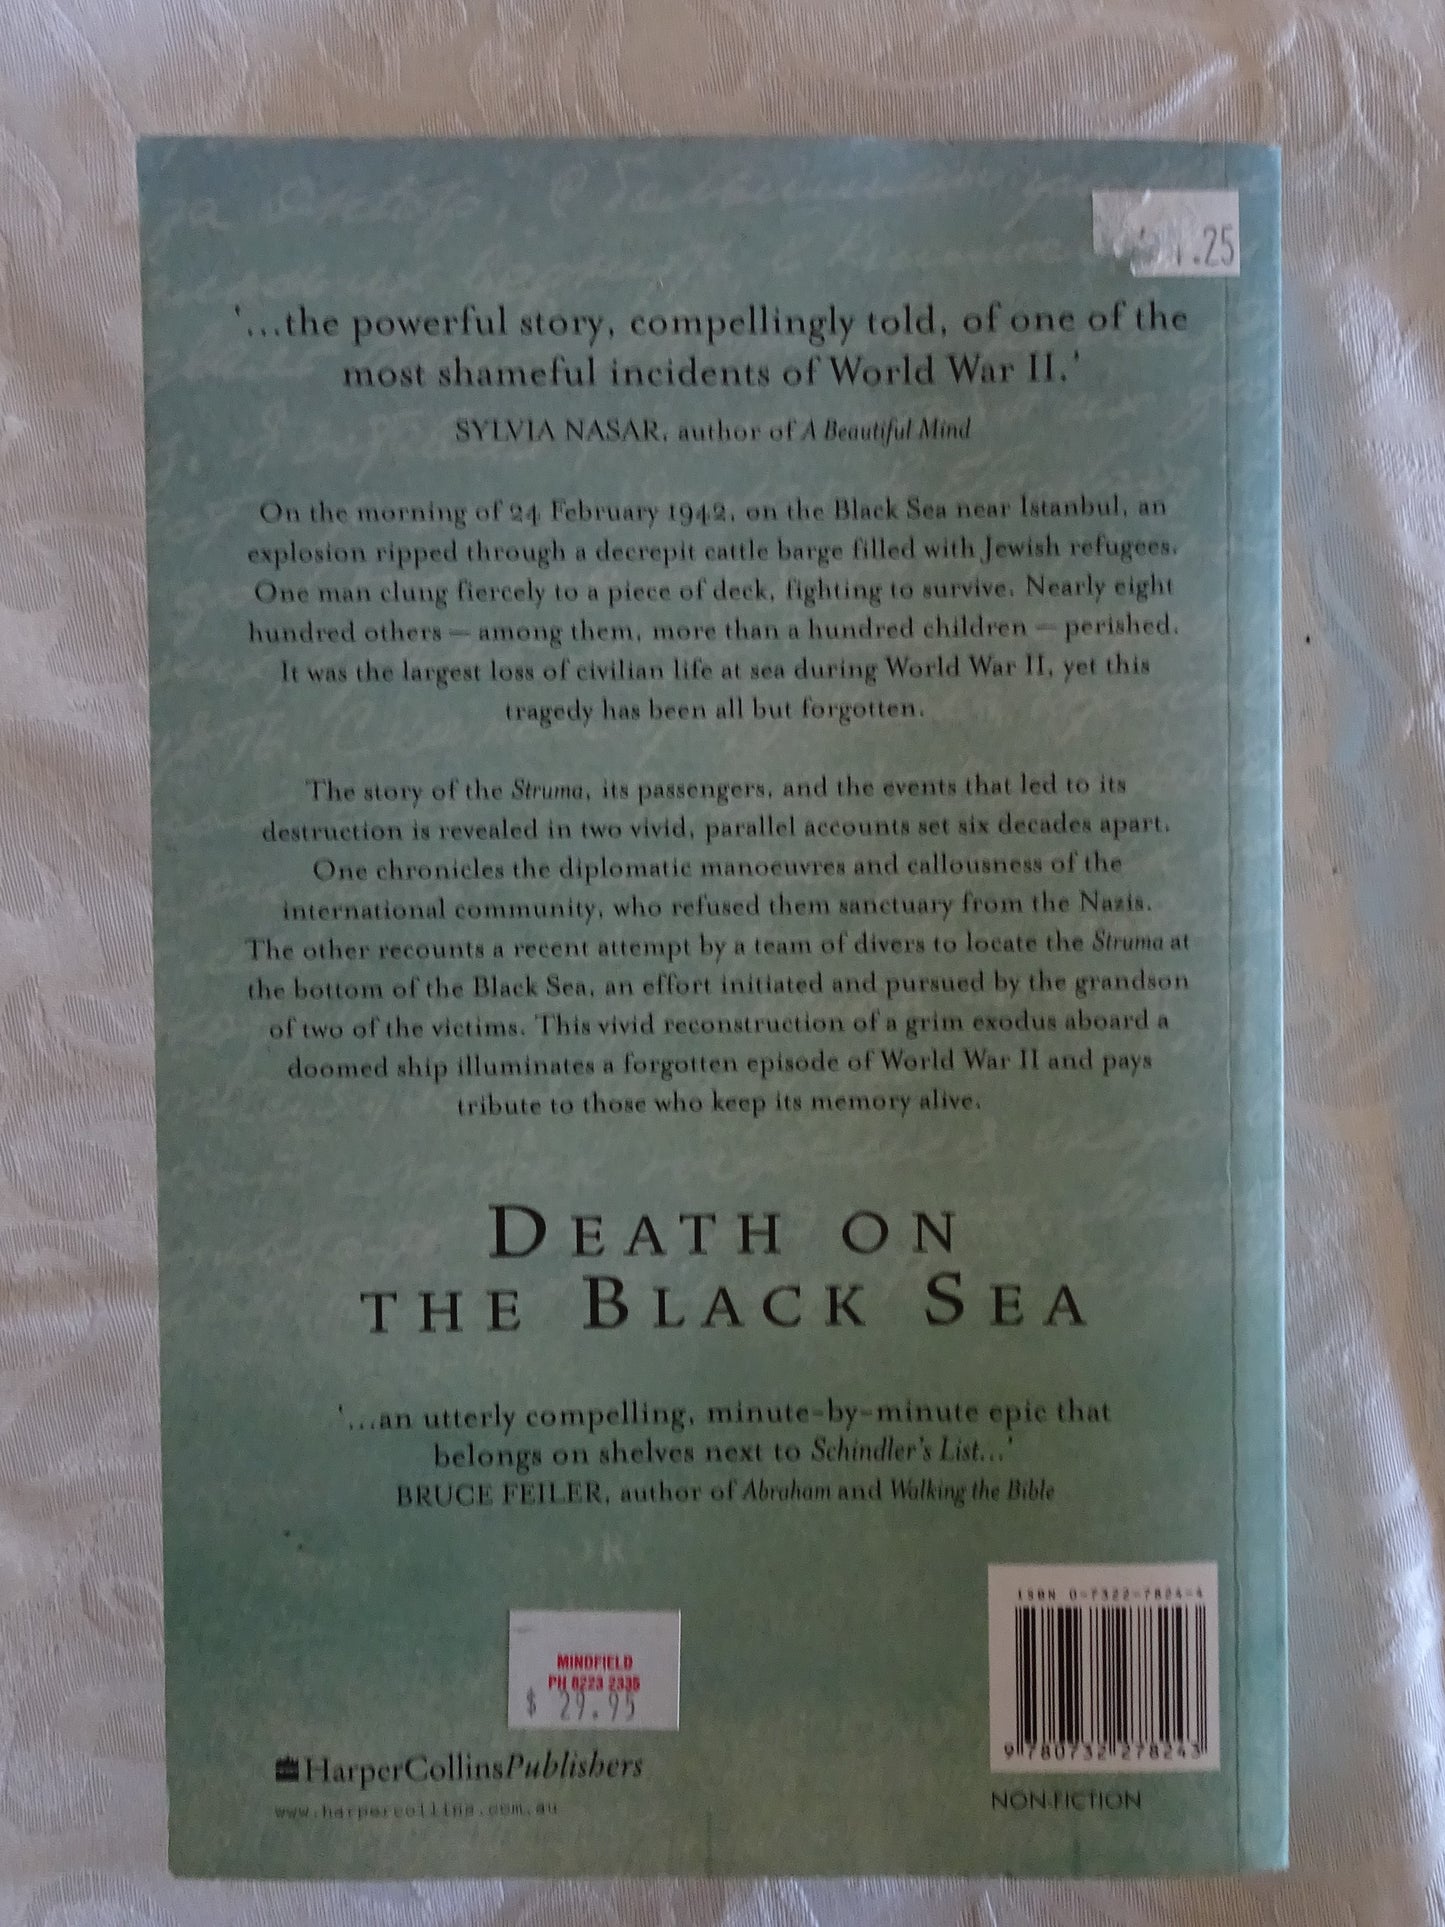 Death On The Black Sea by Douglas Frantz and Catherine Collins